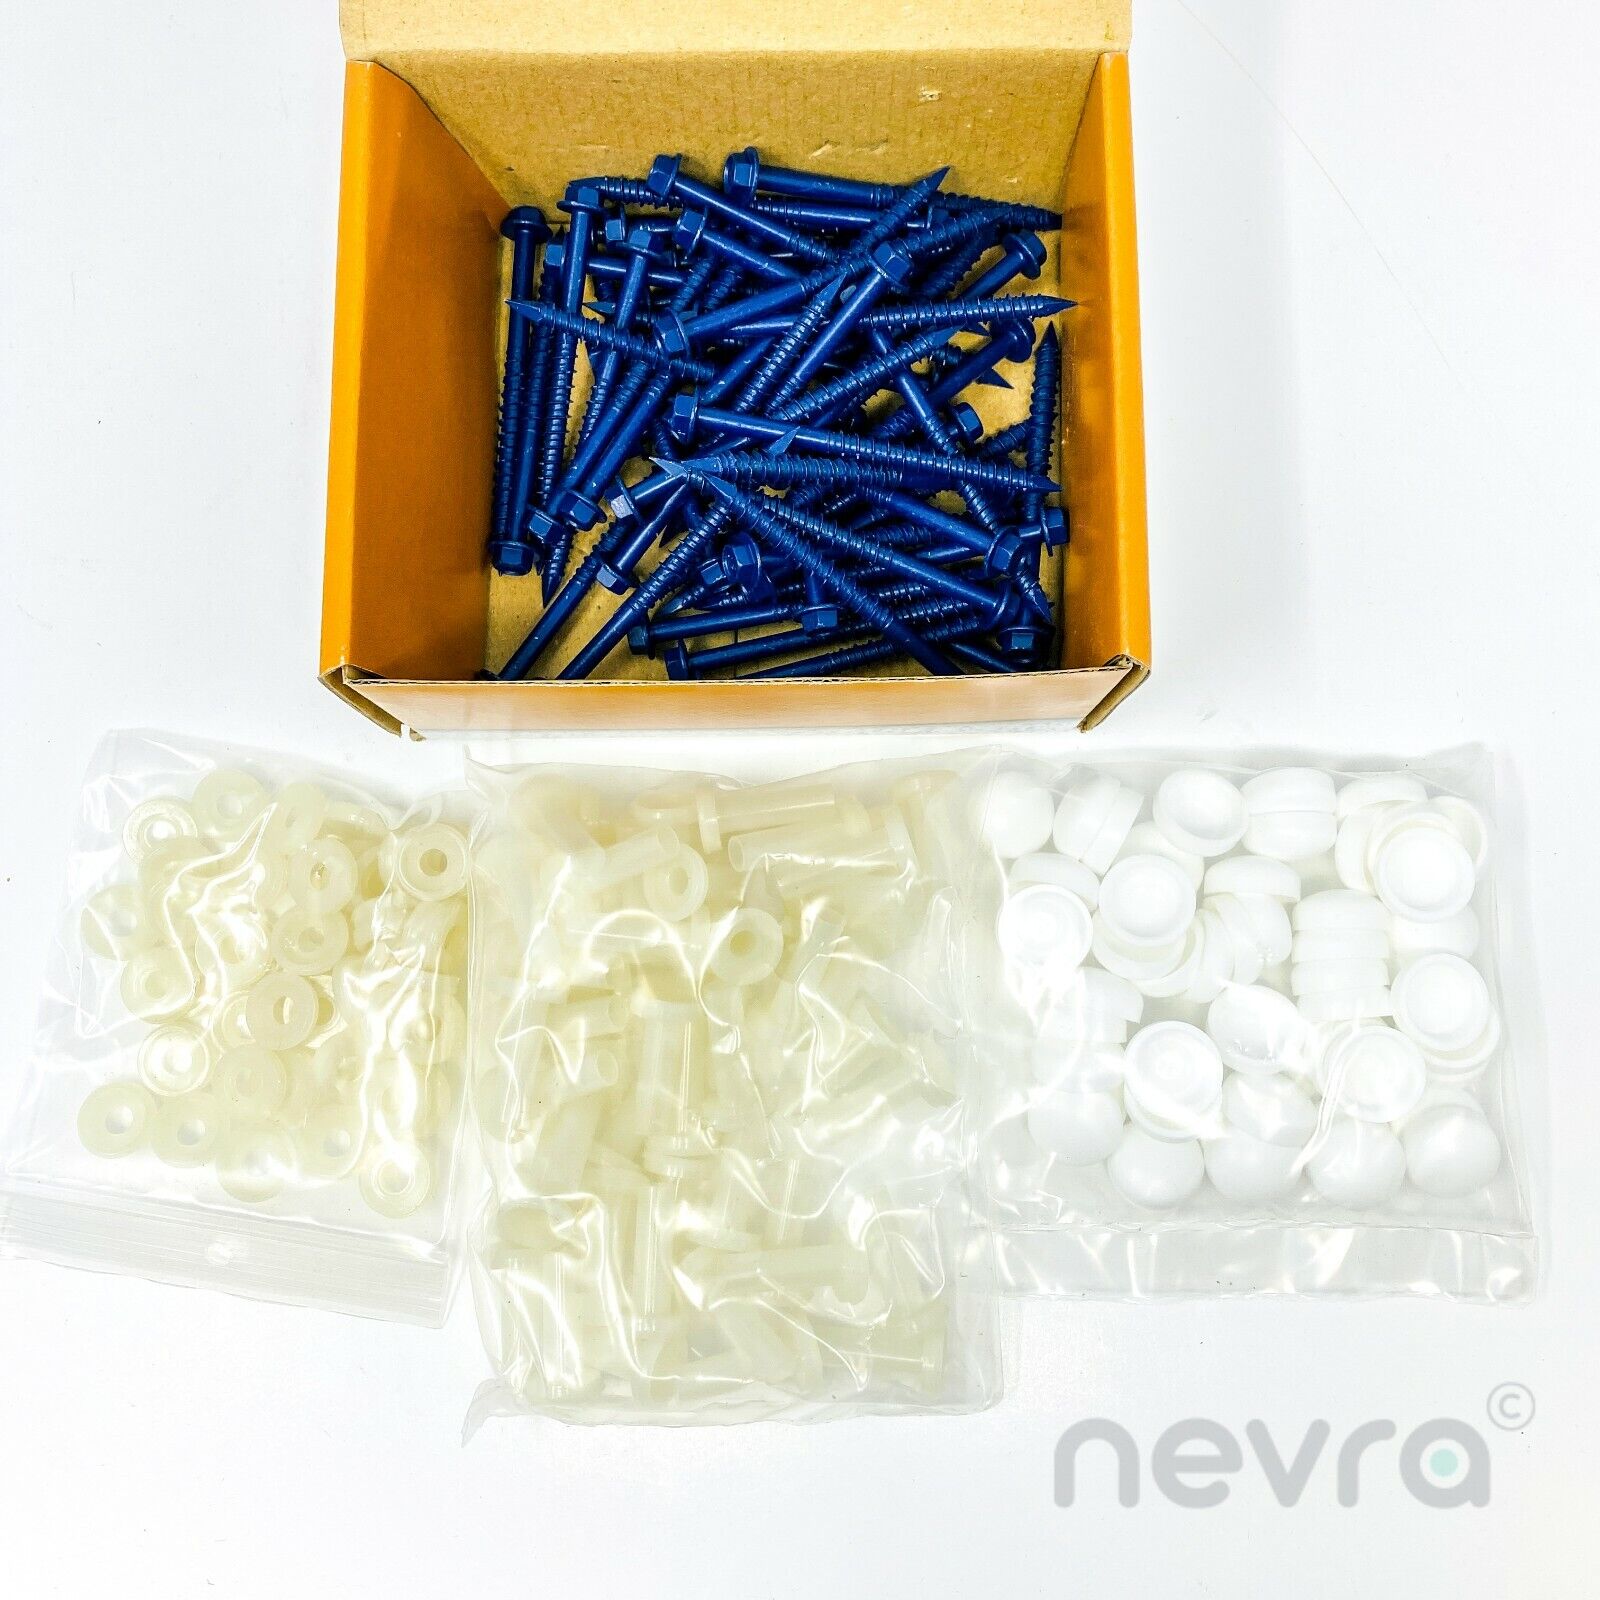 200 pcs Set Pro-Tect WHITE Blue-Tap Concrete Screws, Sleeves, Washers and Caps PRO-TECT Does Not Apply - фотография #5